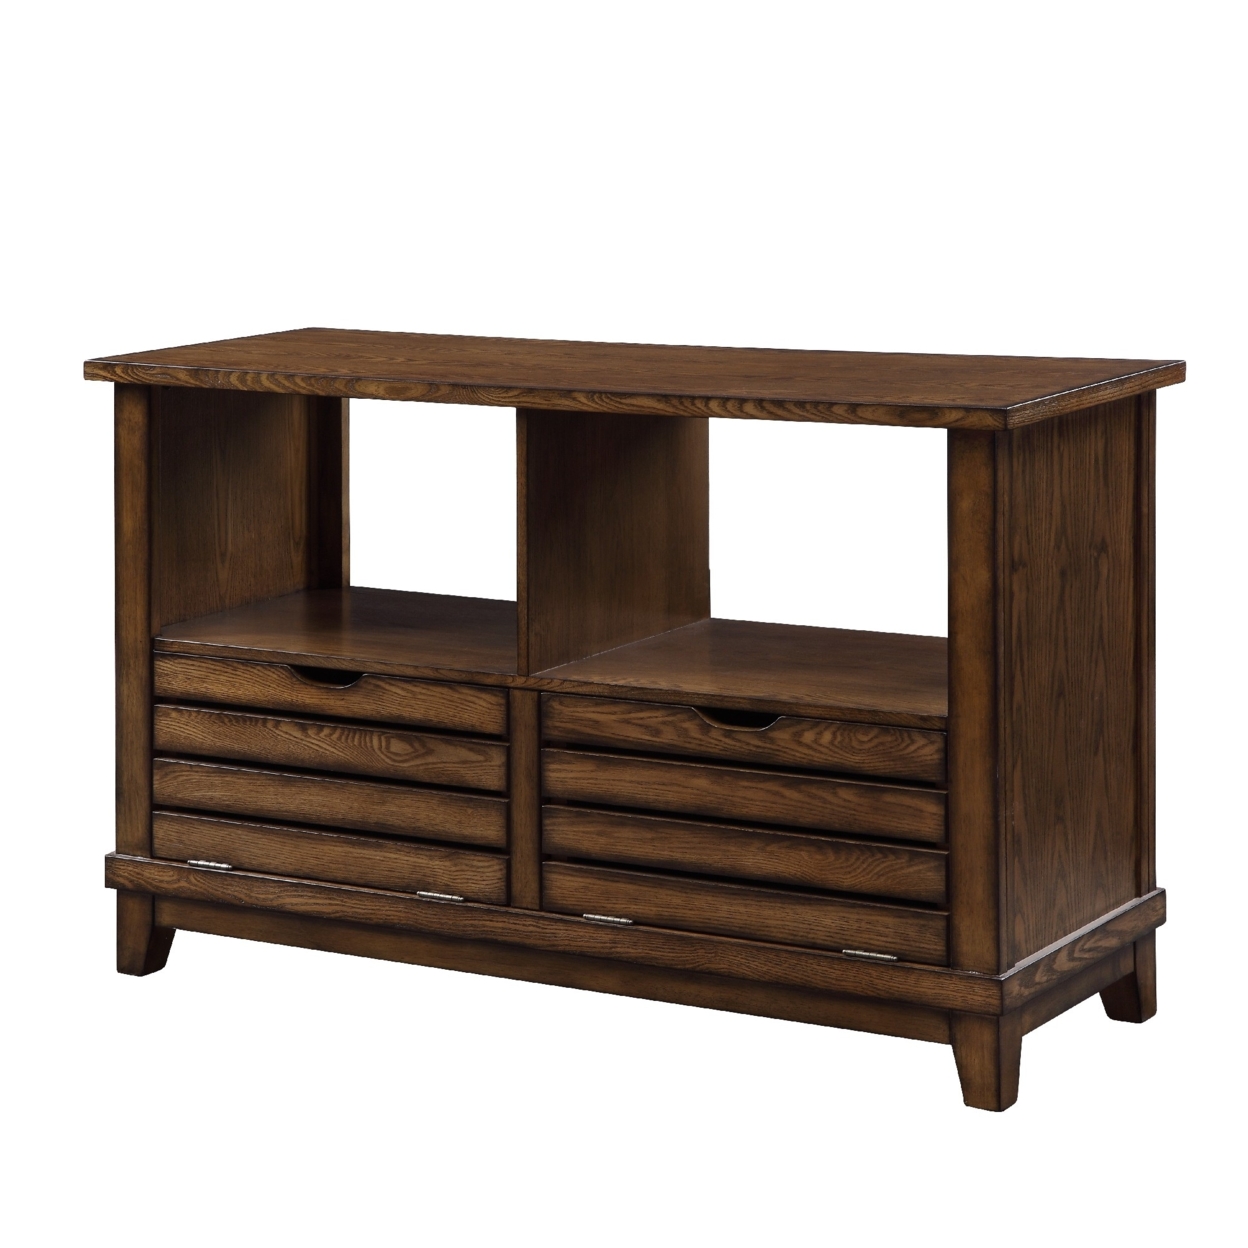 Slatted Front Sofa Table With Two Drawers And Two Shelf, Brown- Saltoro Sherpi